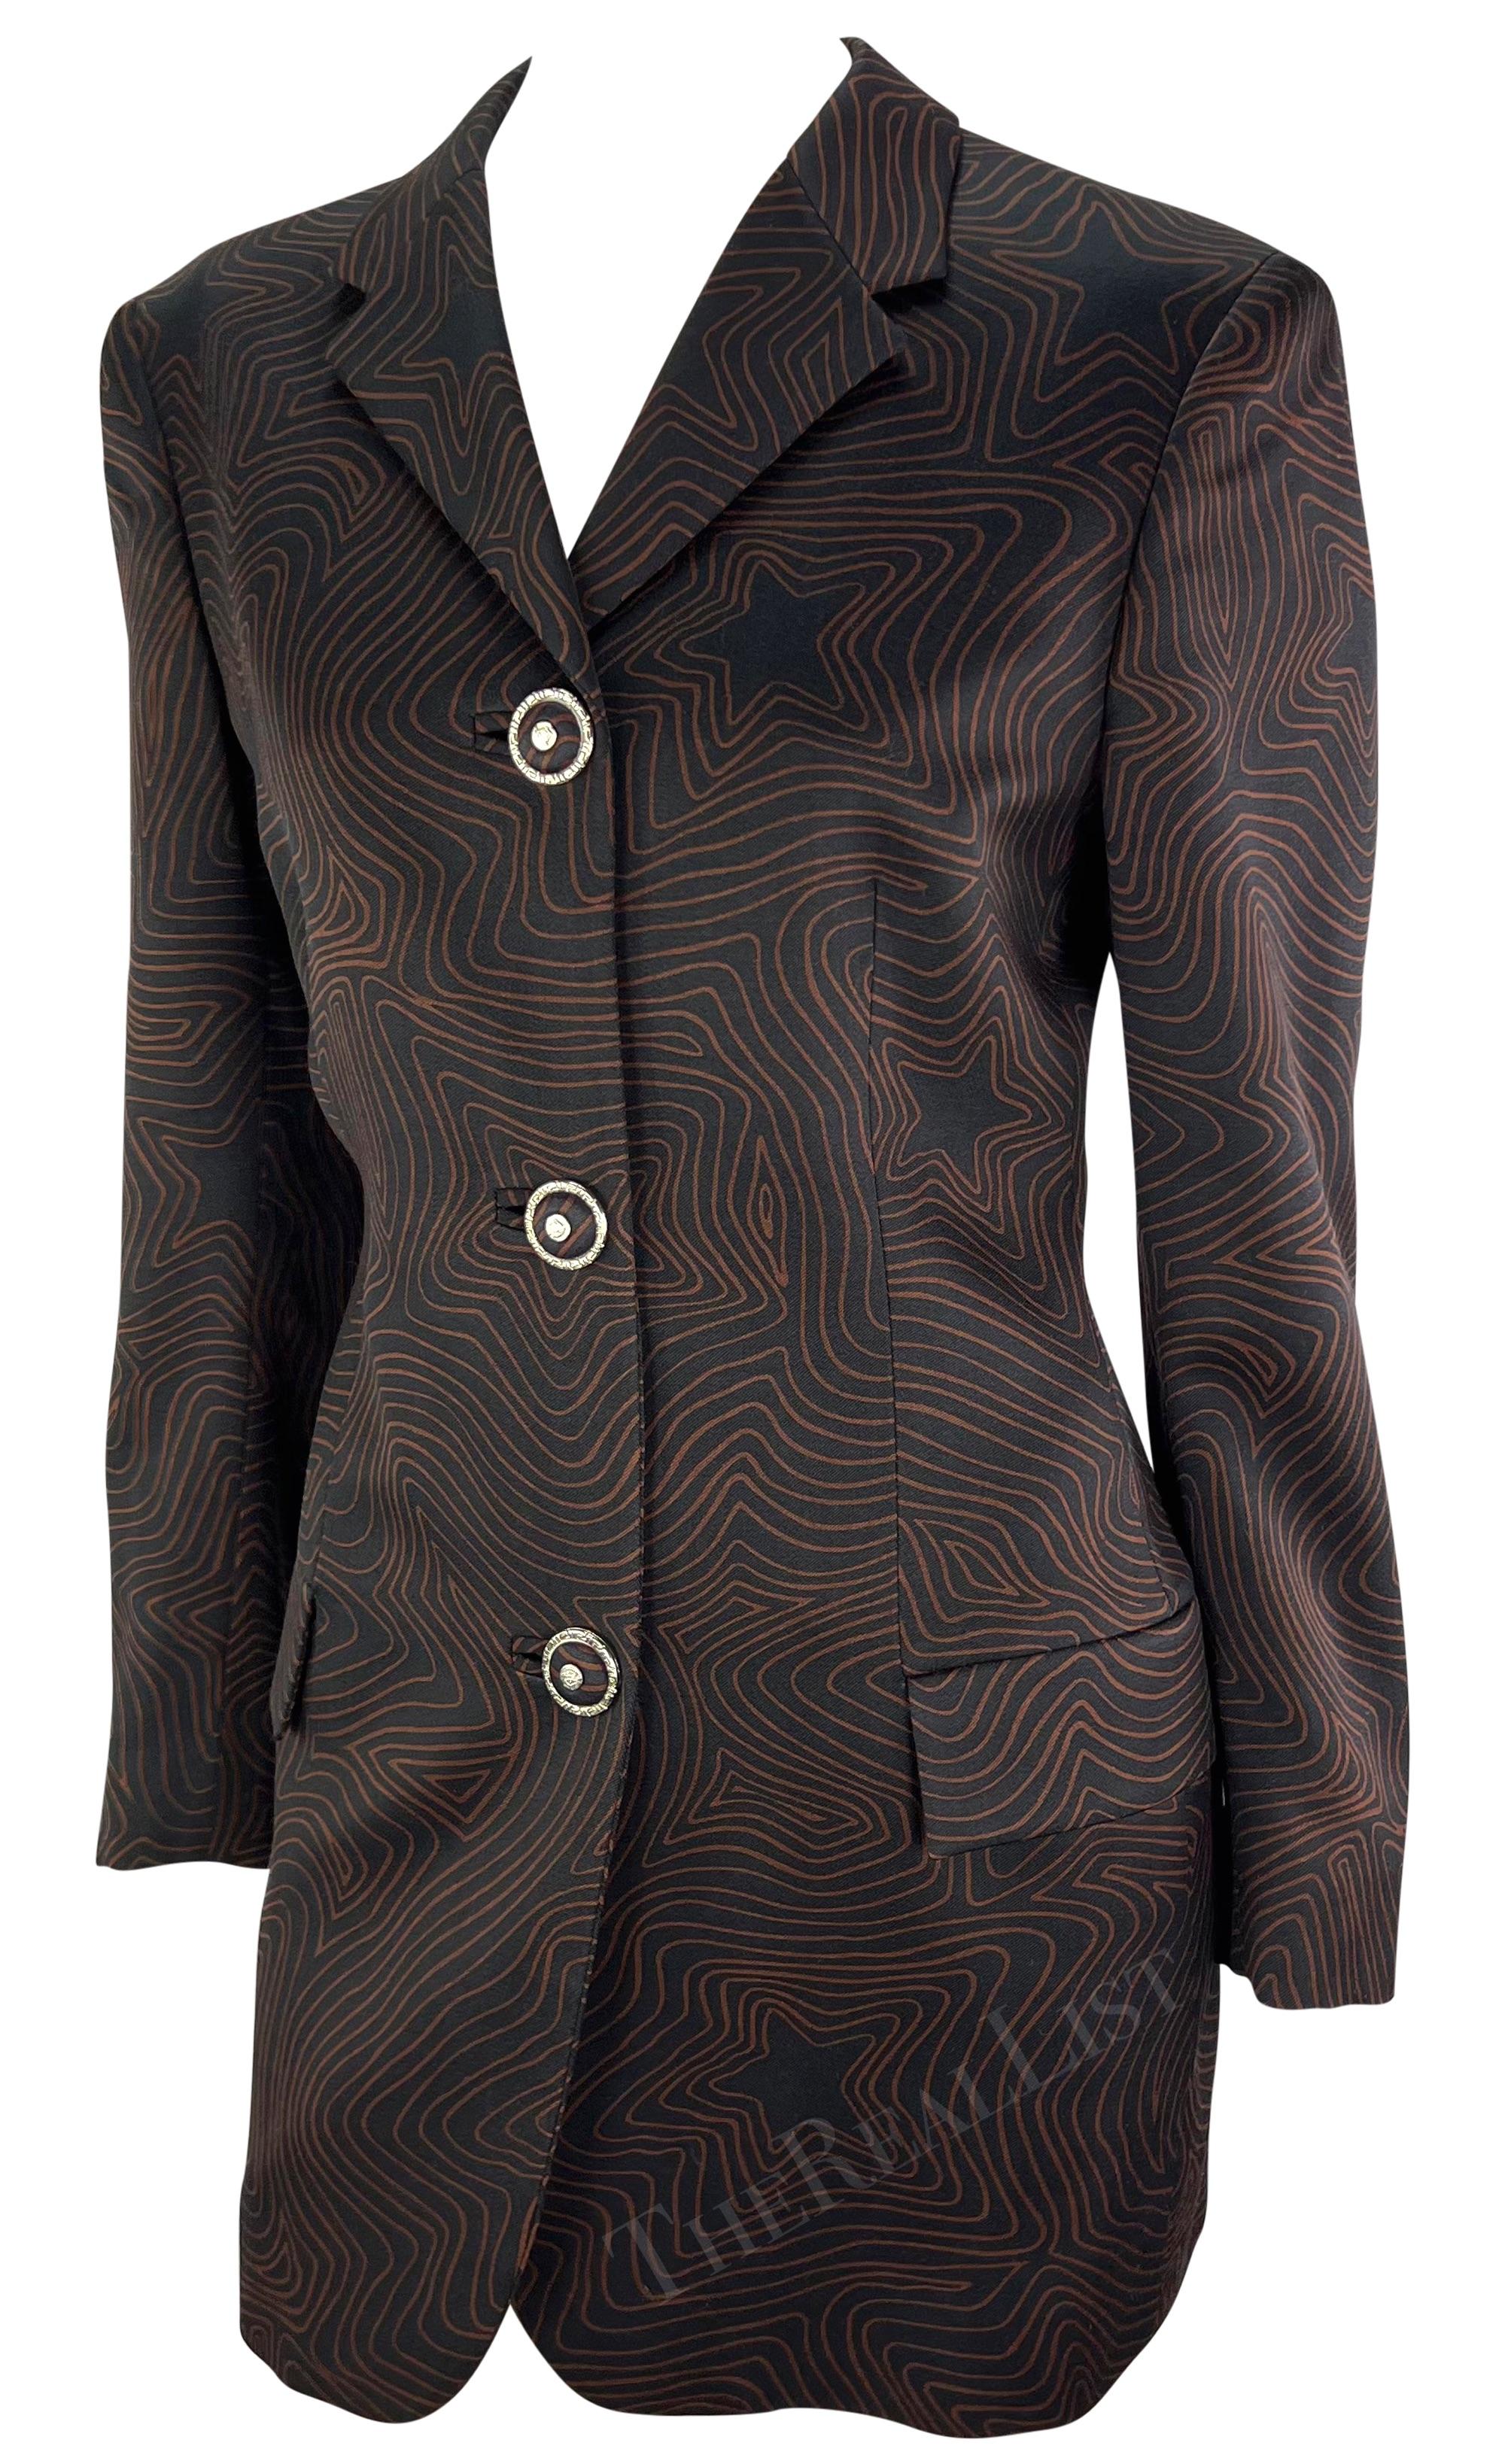 S/S 1996 Gianni Versace Black Brown Abstract Star Print Blazer In Excellent Condition For Sale In West Hollywood, CA